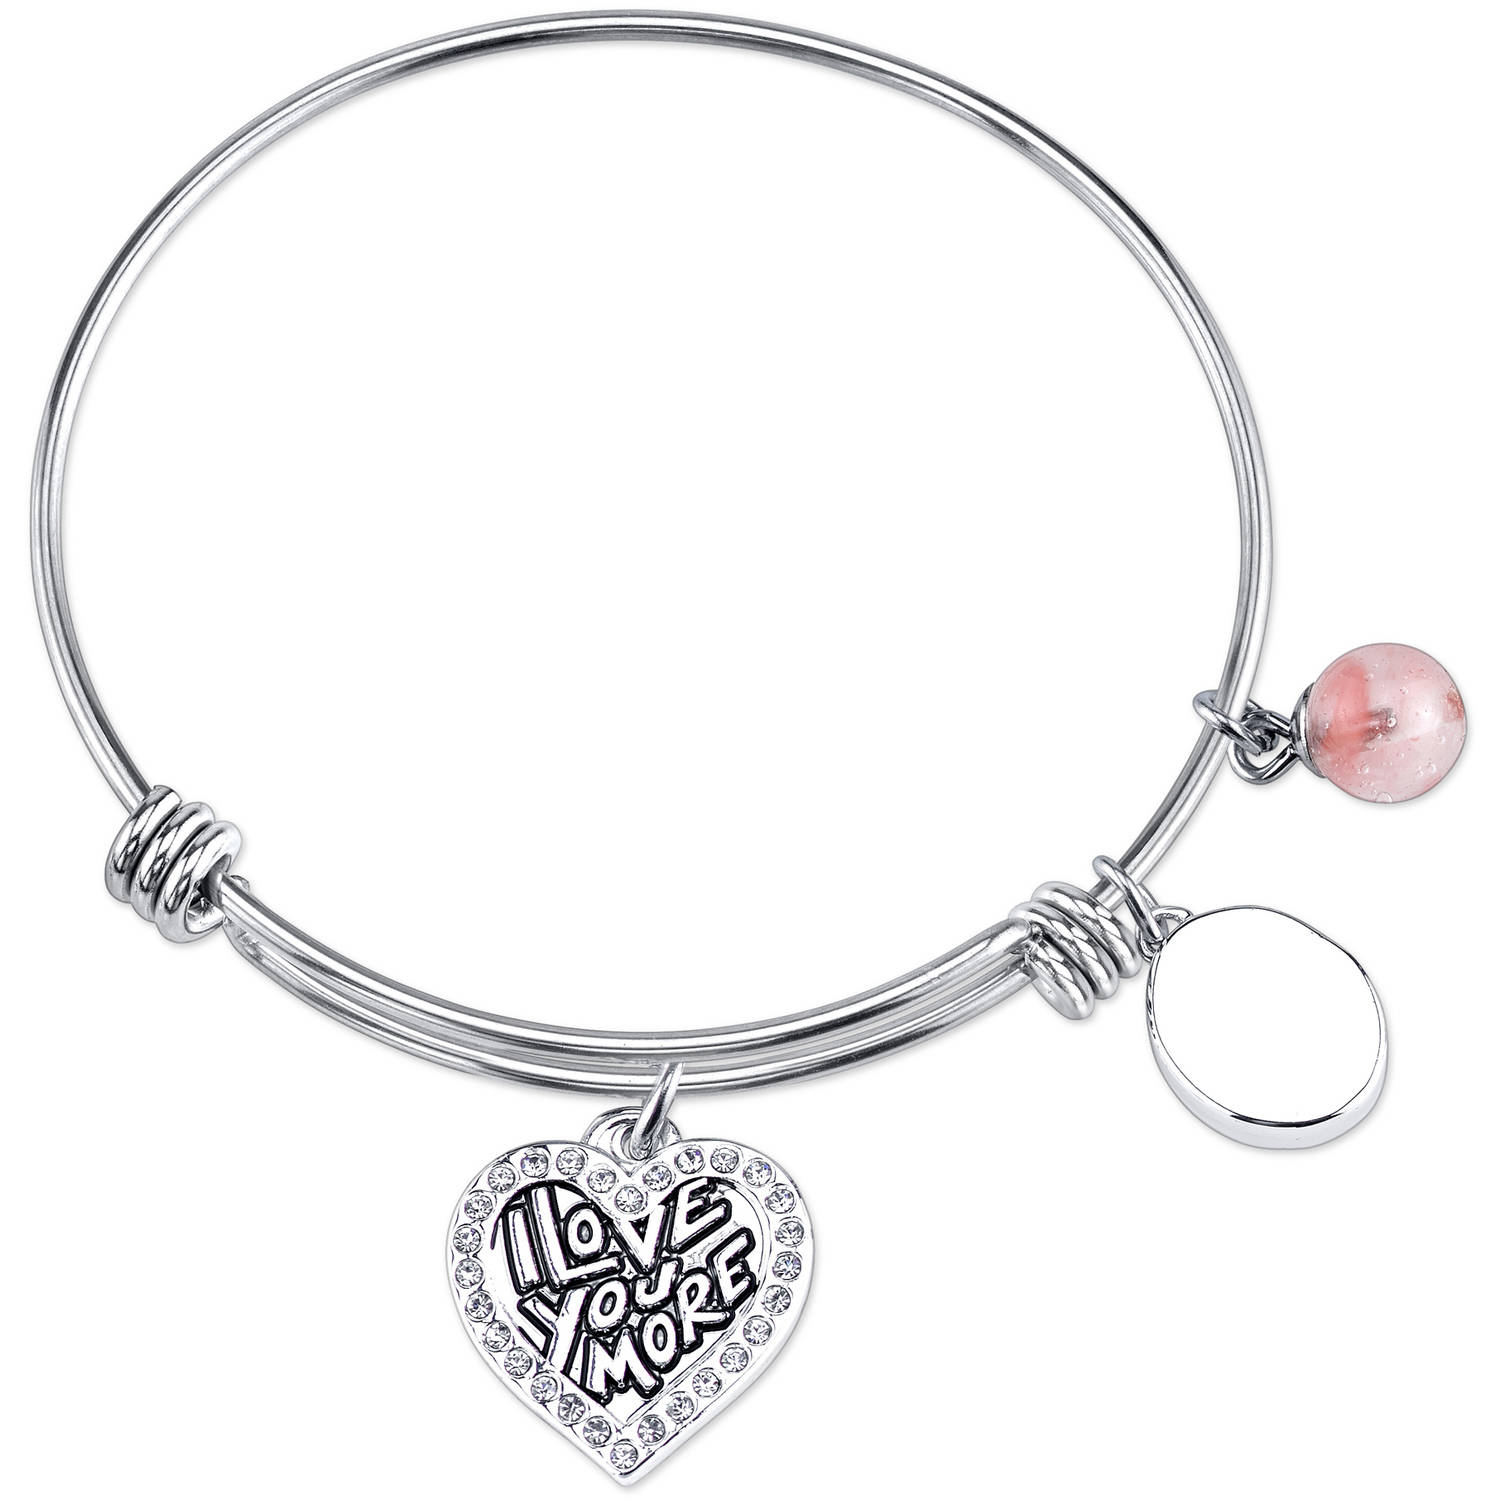 Little Luxuries 8mm Cherry Quartz and Crystal Stainless Steel "I Love You More" Heart Bead Bangle Bracelet, 8" - image 1 of 2